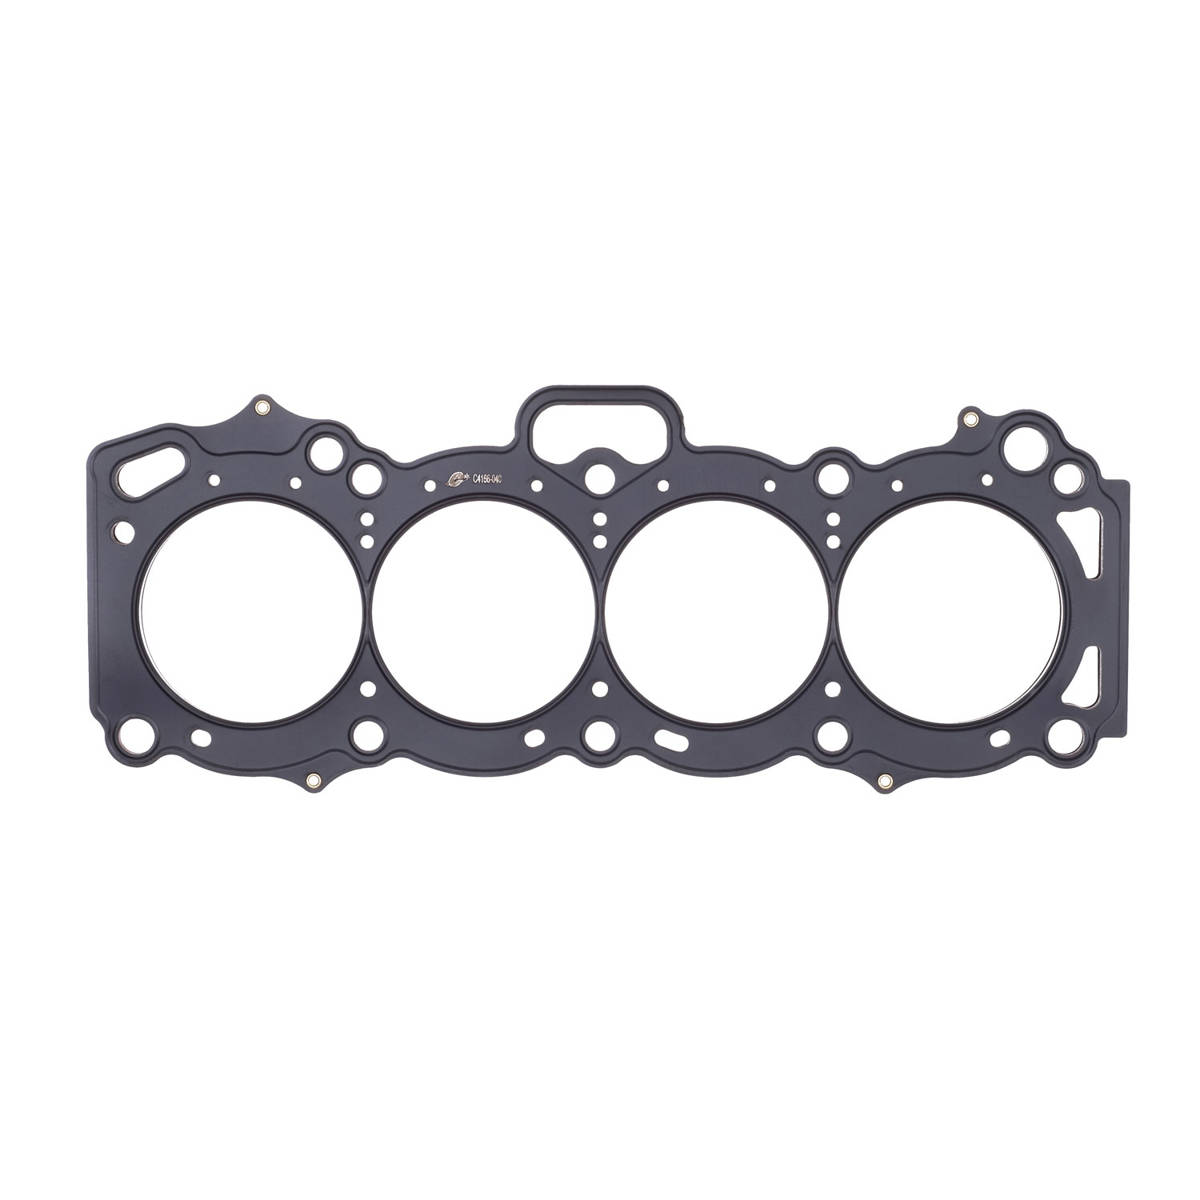 Cylinder Head Gasket Toyota 4A-GE/4A-GEZ .084" MLS , 83mm Bore, 16-Valve Cometic C4166-084